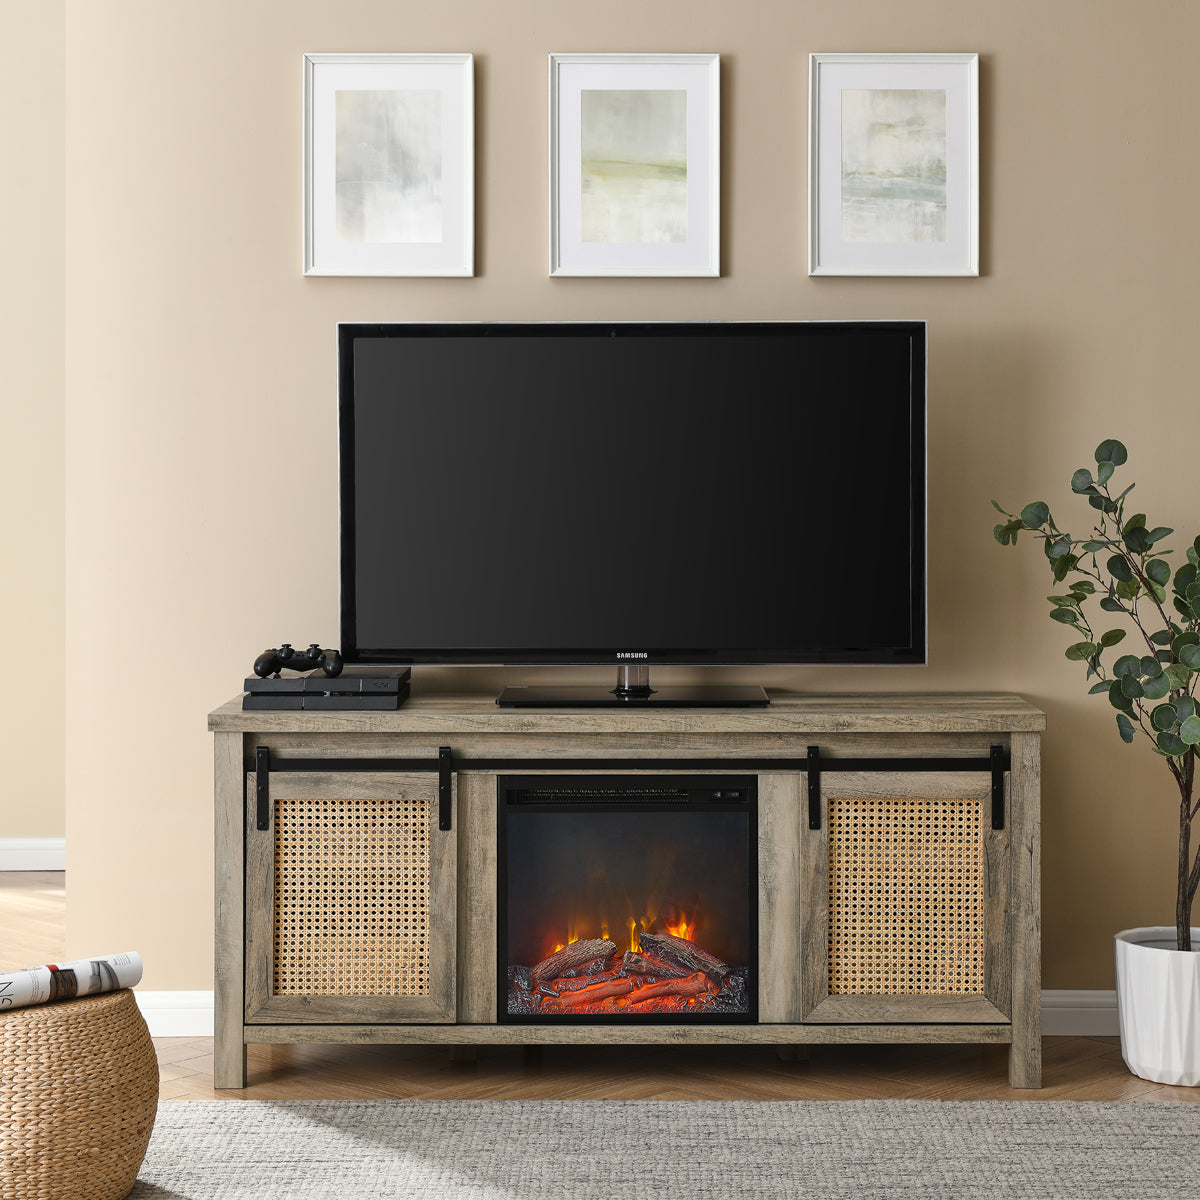 SYNGAR Fireplace TV Stand for TVs up to 65 inches, 58 Inch, Espresso, D3182